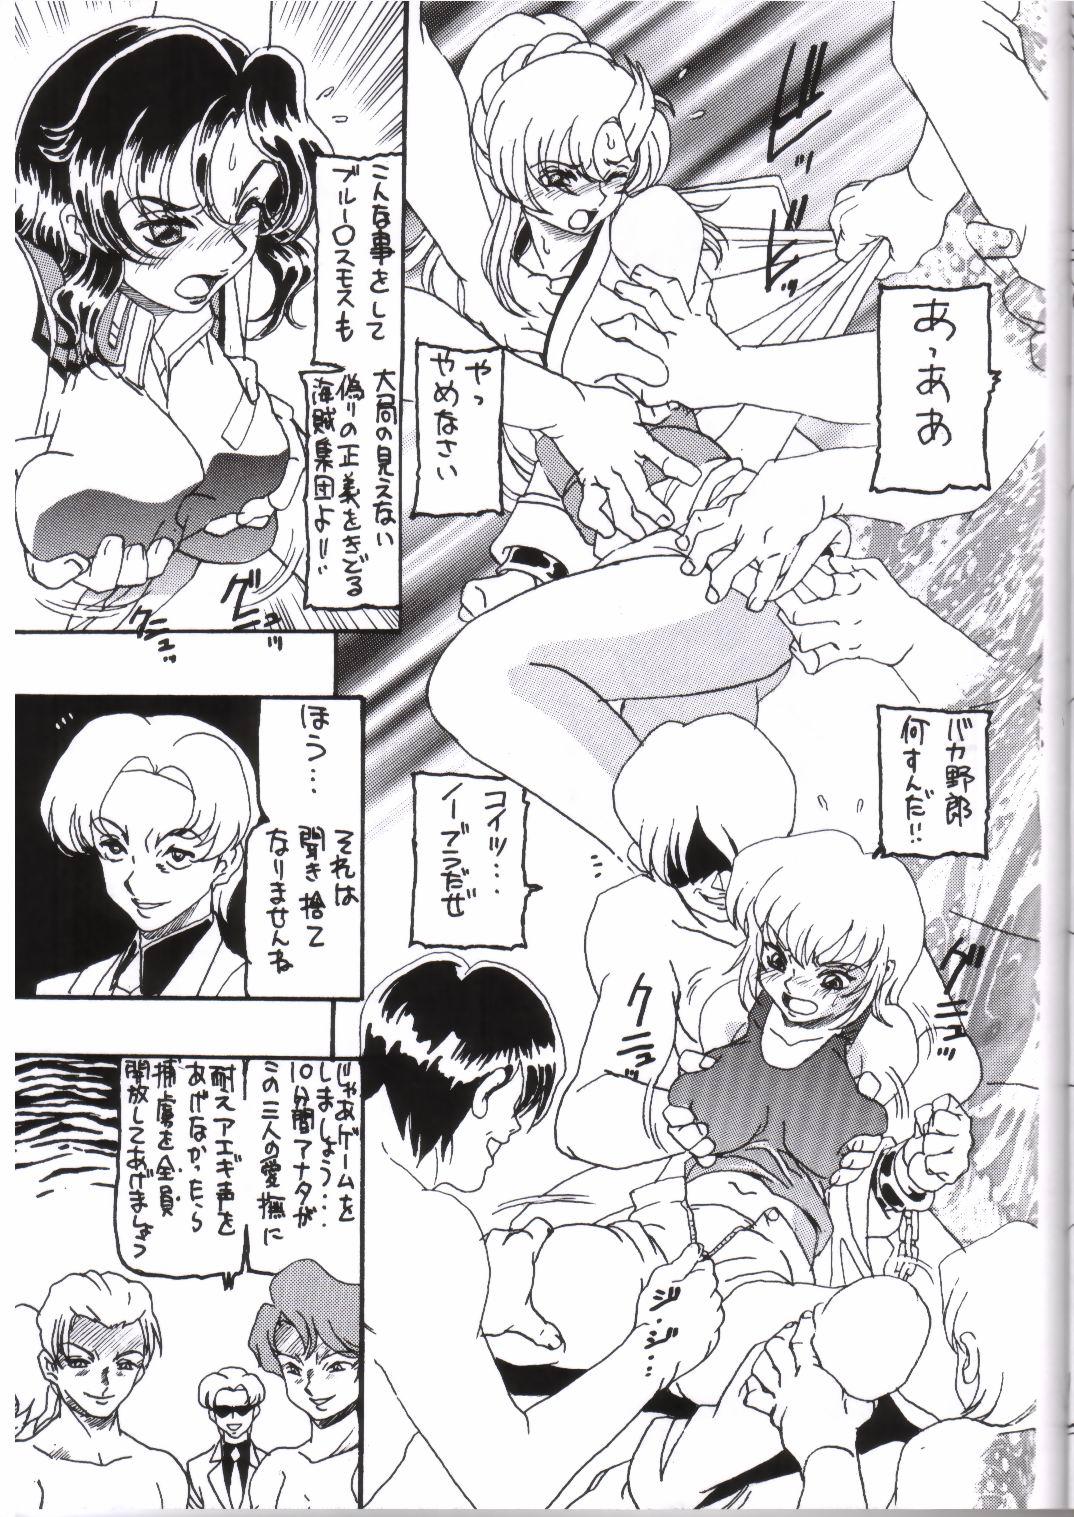 Strap On Moon Shine 9 - Gundam seed Tight Pussy - Page 8